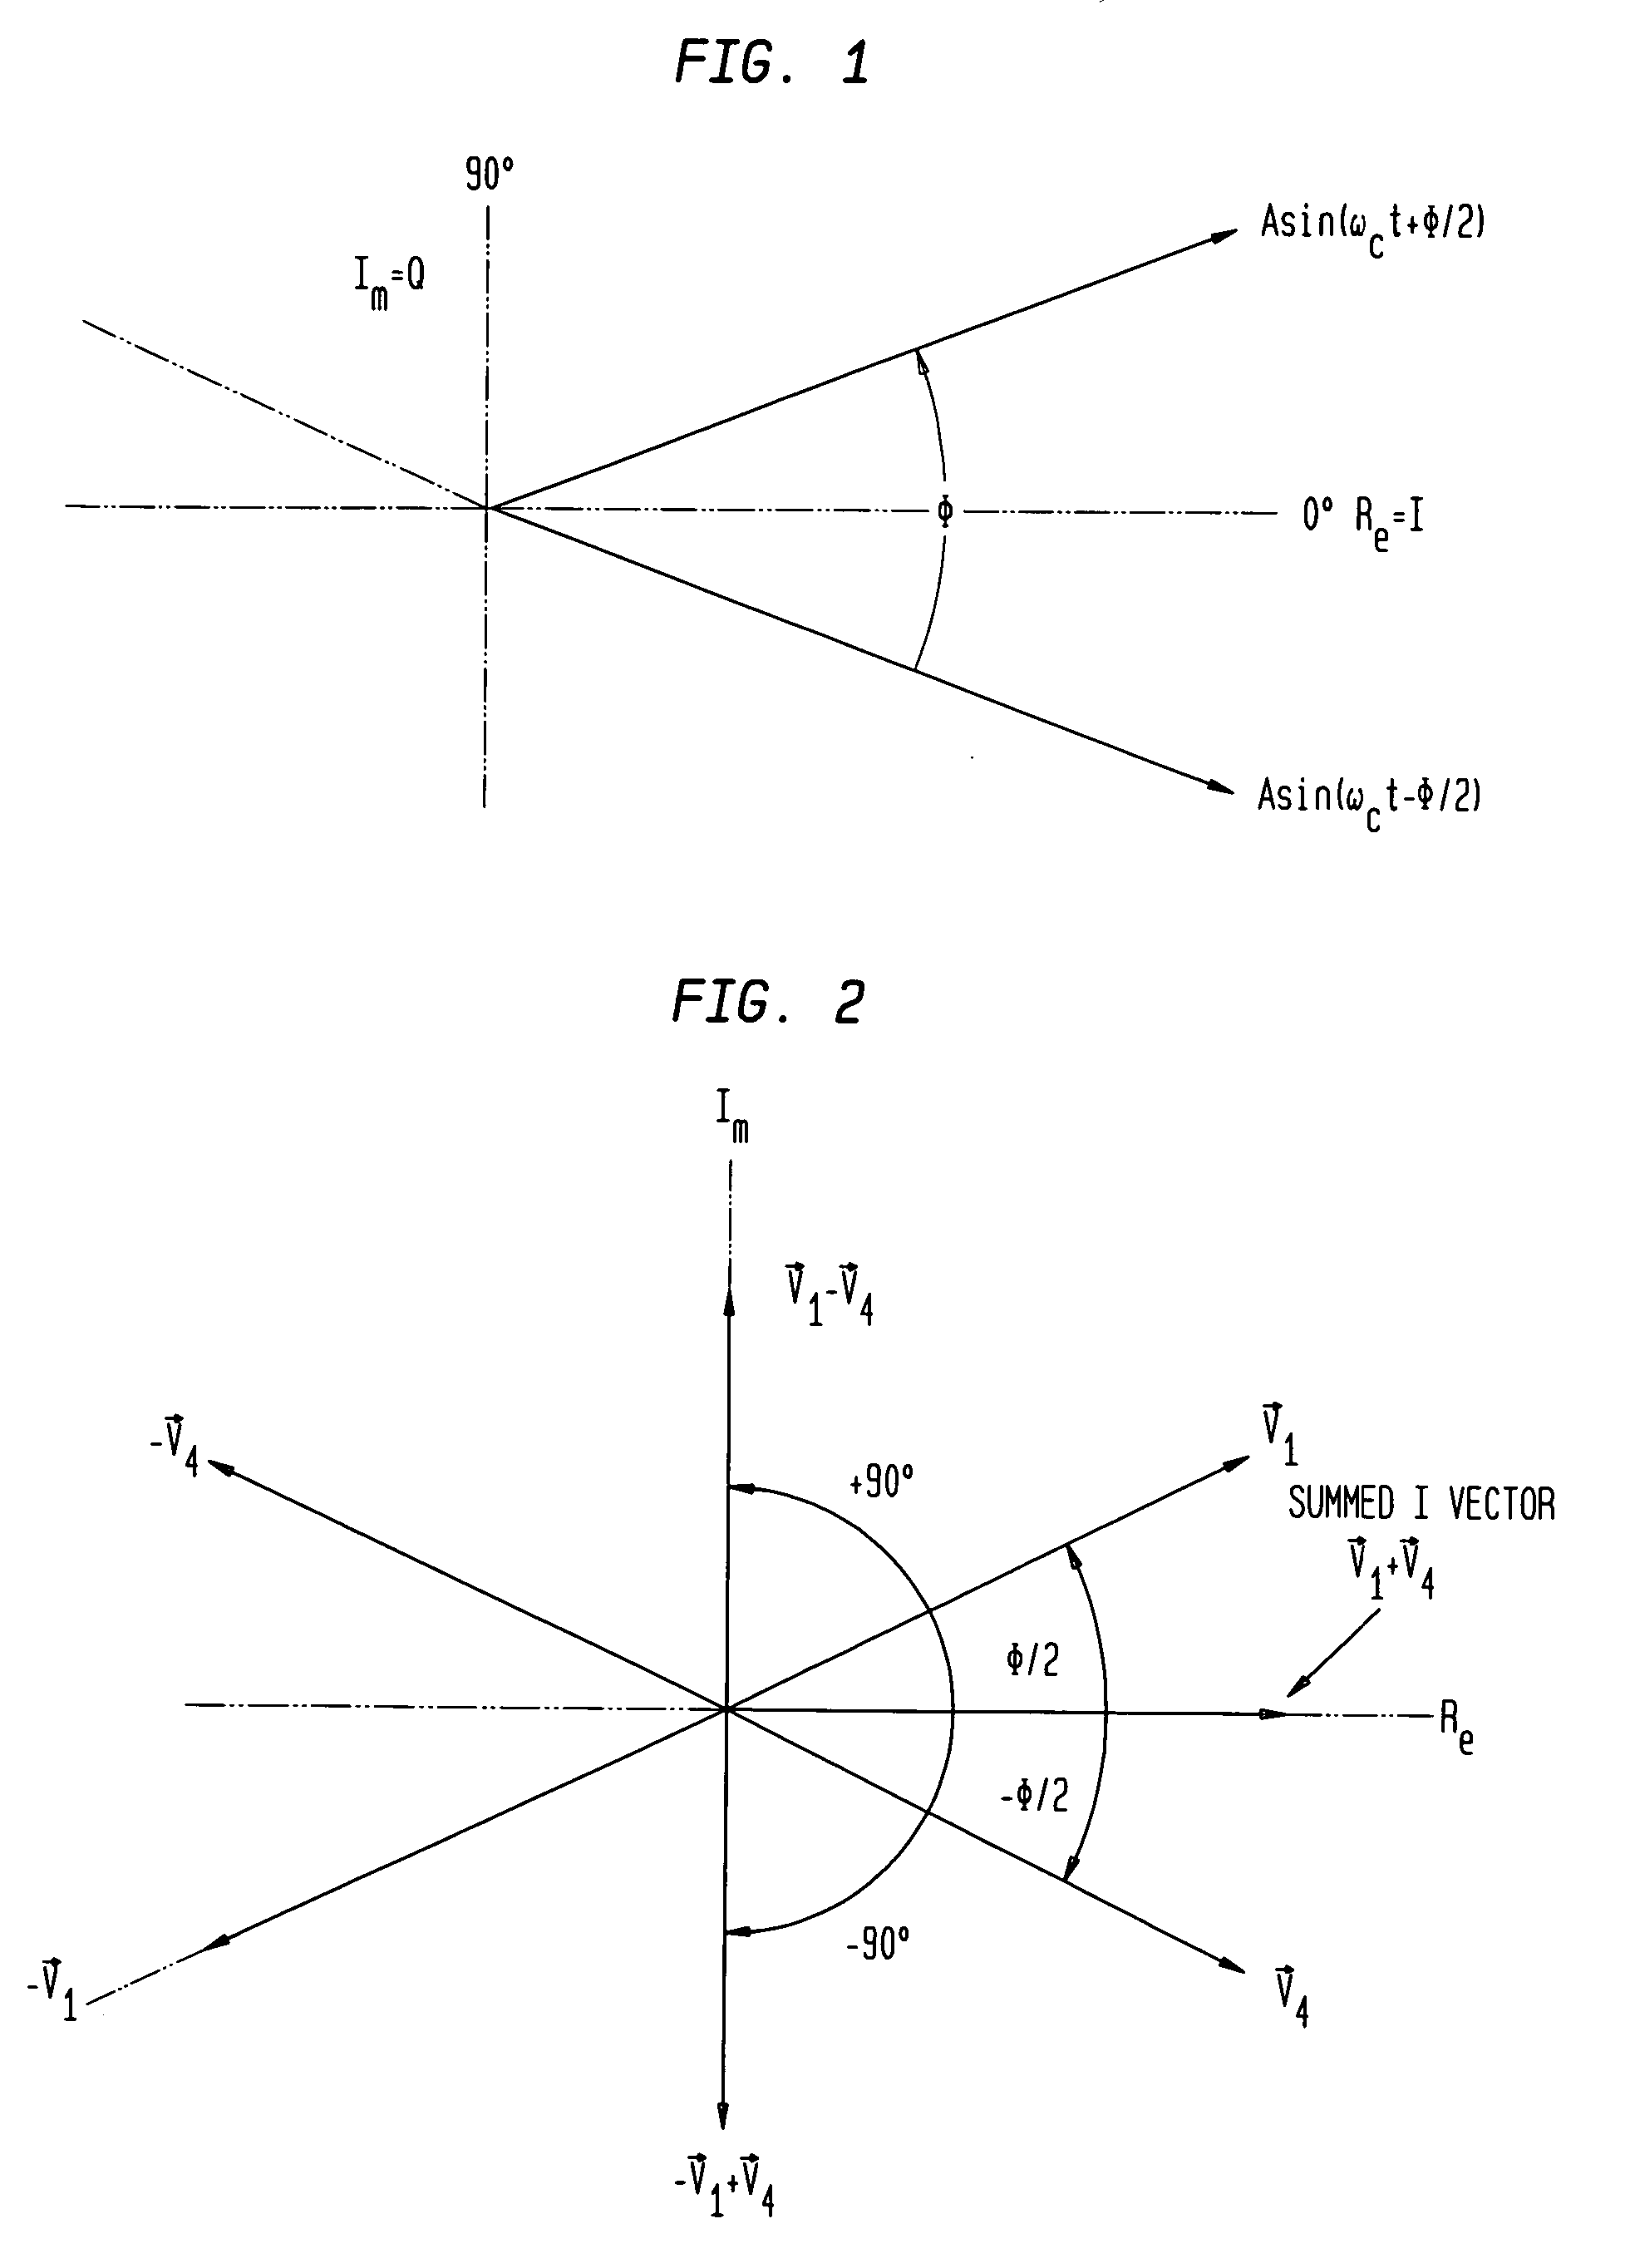 Orthogonal signal generation using vector spreading and combining